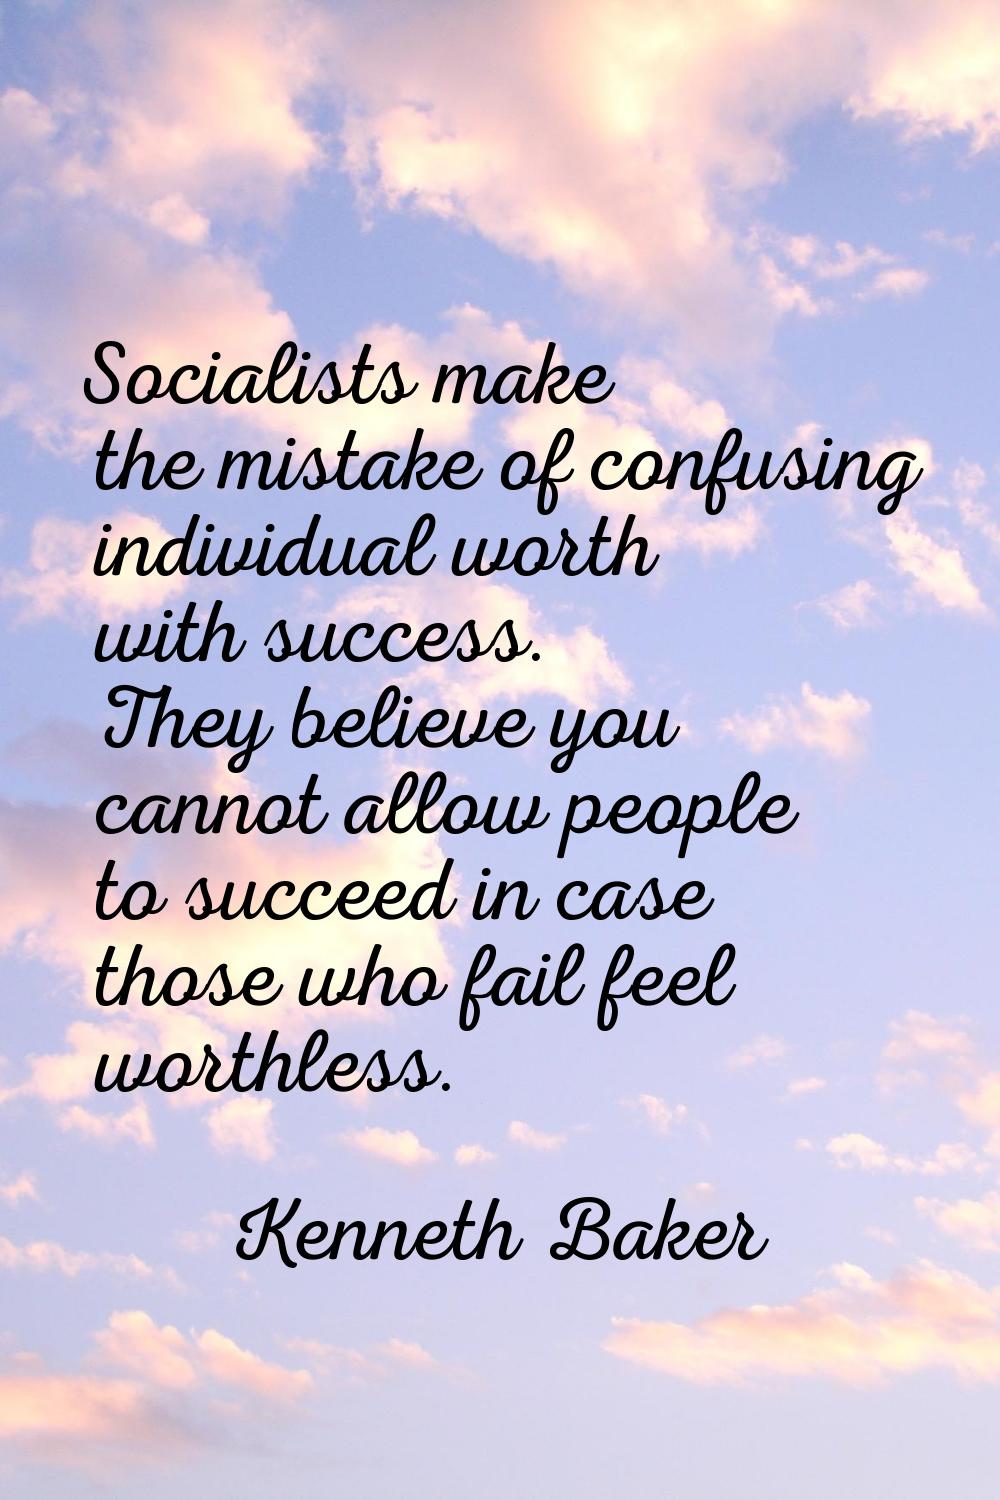 Socialists make the mistake of confusing individual worth with success. They believe you cannot all